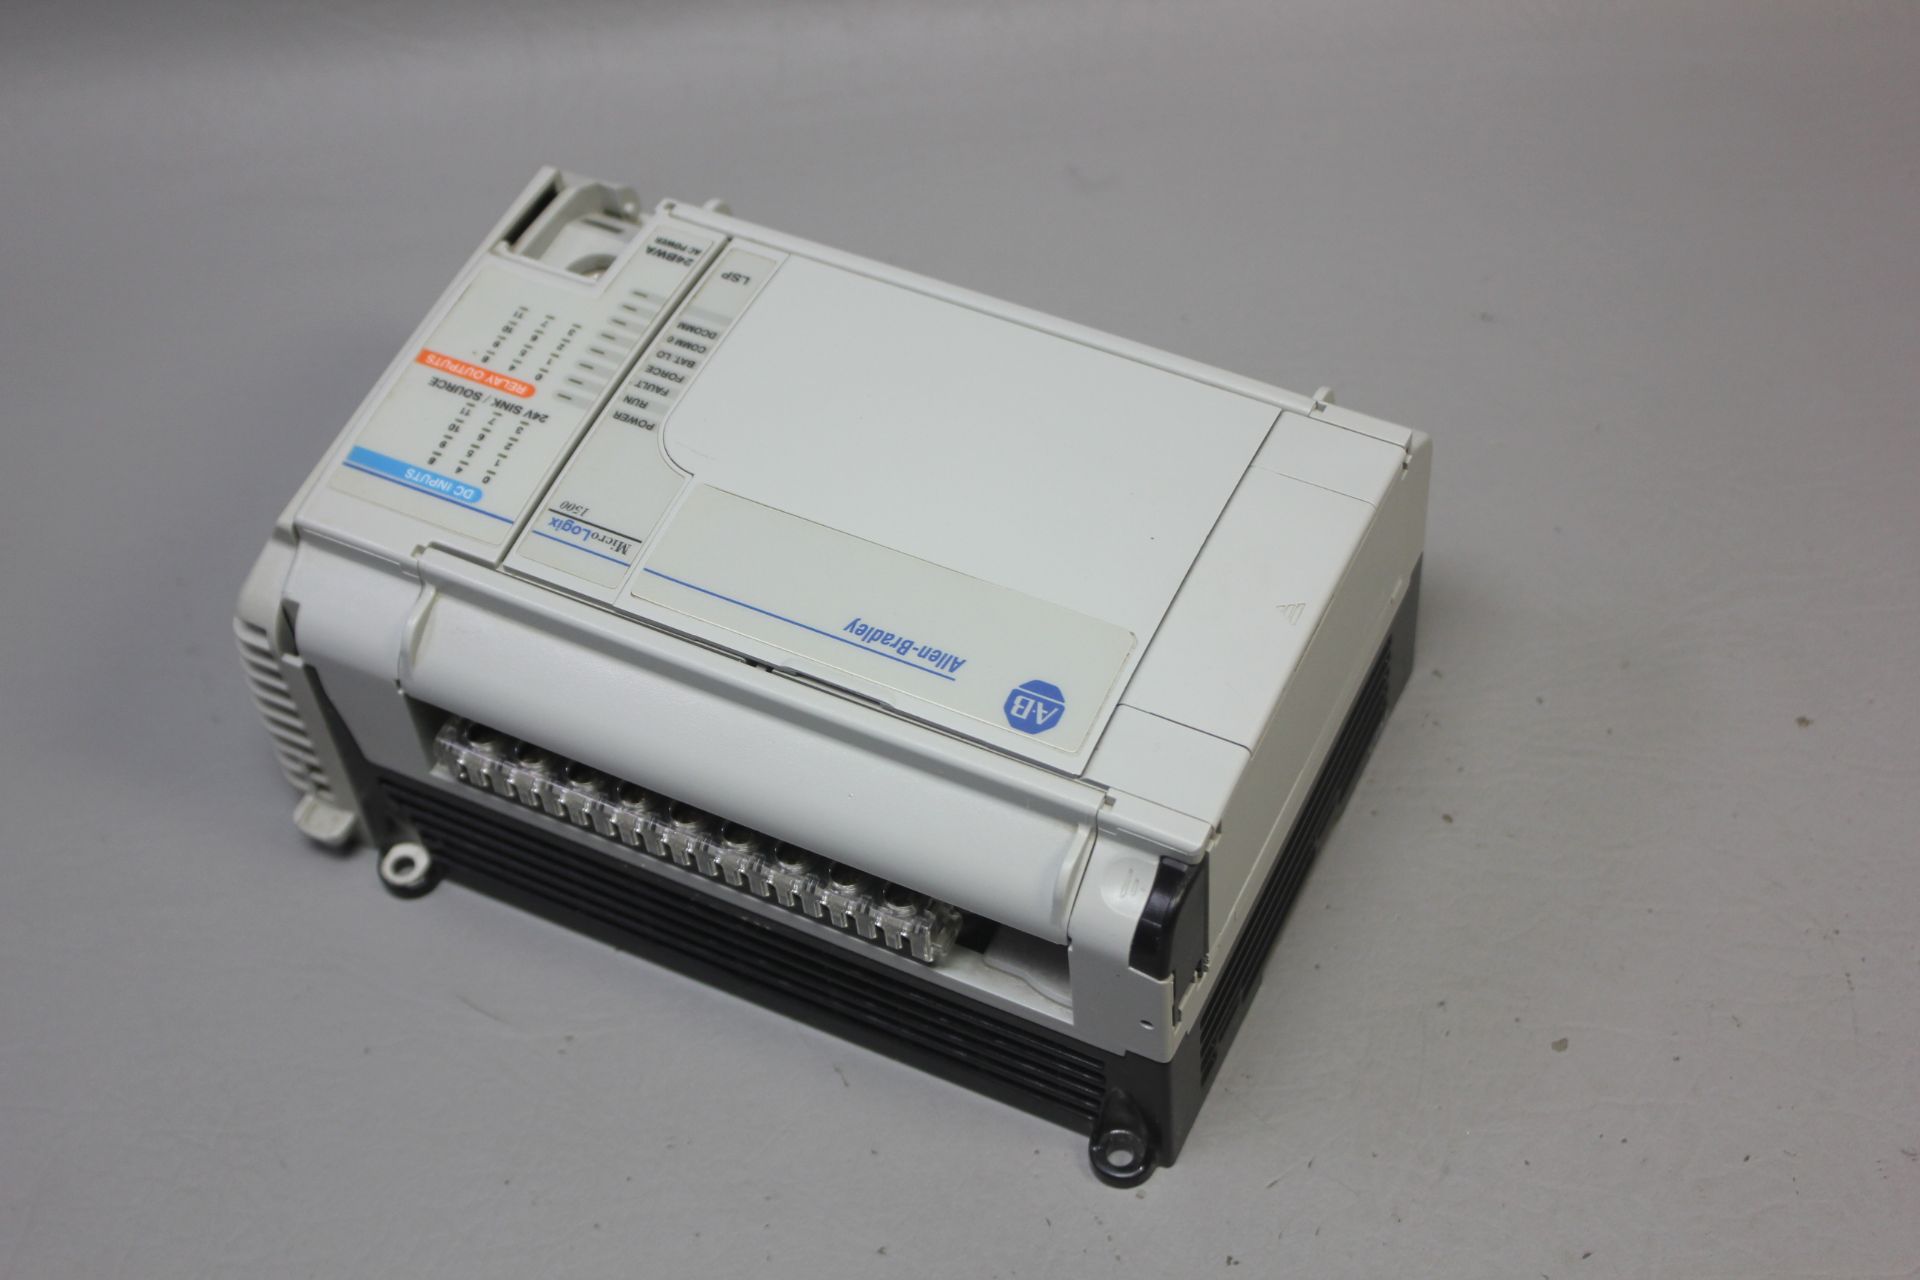 ALLEN BRADLEY MICROLOGIX 1500 CPU WITH BASE UNIT - Image 2 of 10